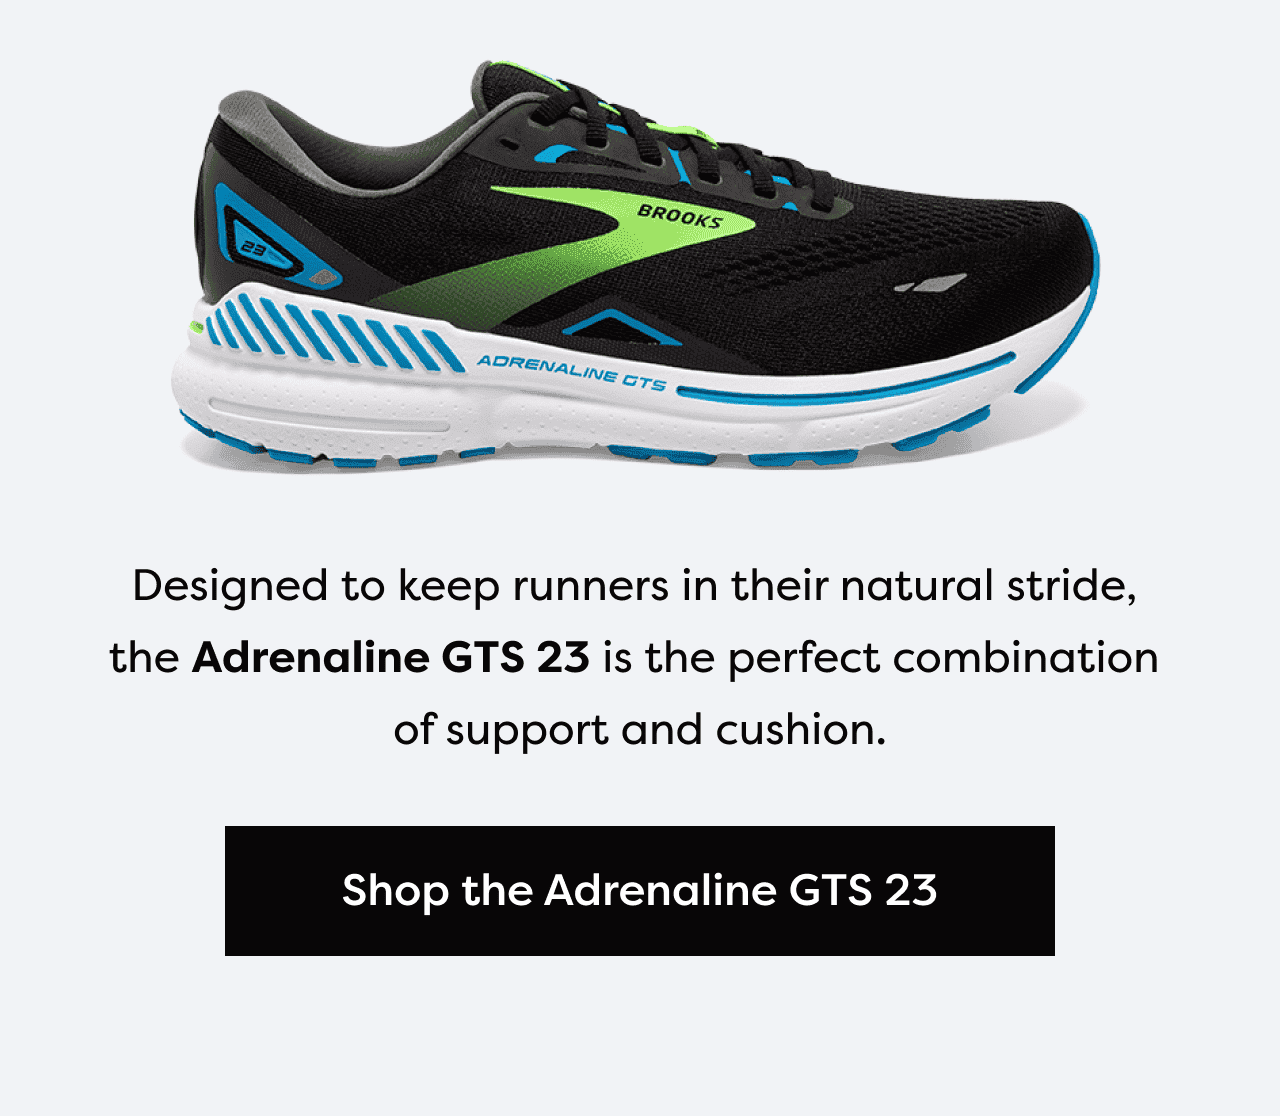 Designed to keep runners in their natural stride, the Adrenaline GTS 23 is the perfect combination of support and cushion. | Shop the Adrenaline GTS 23